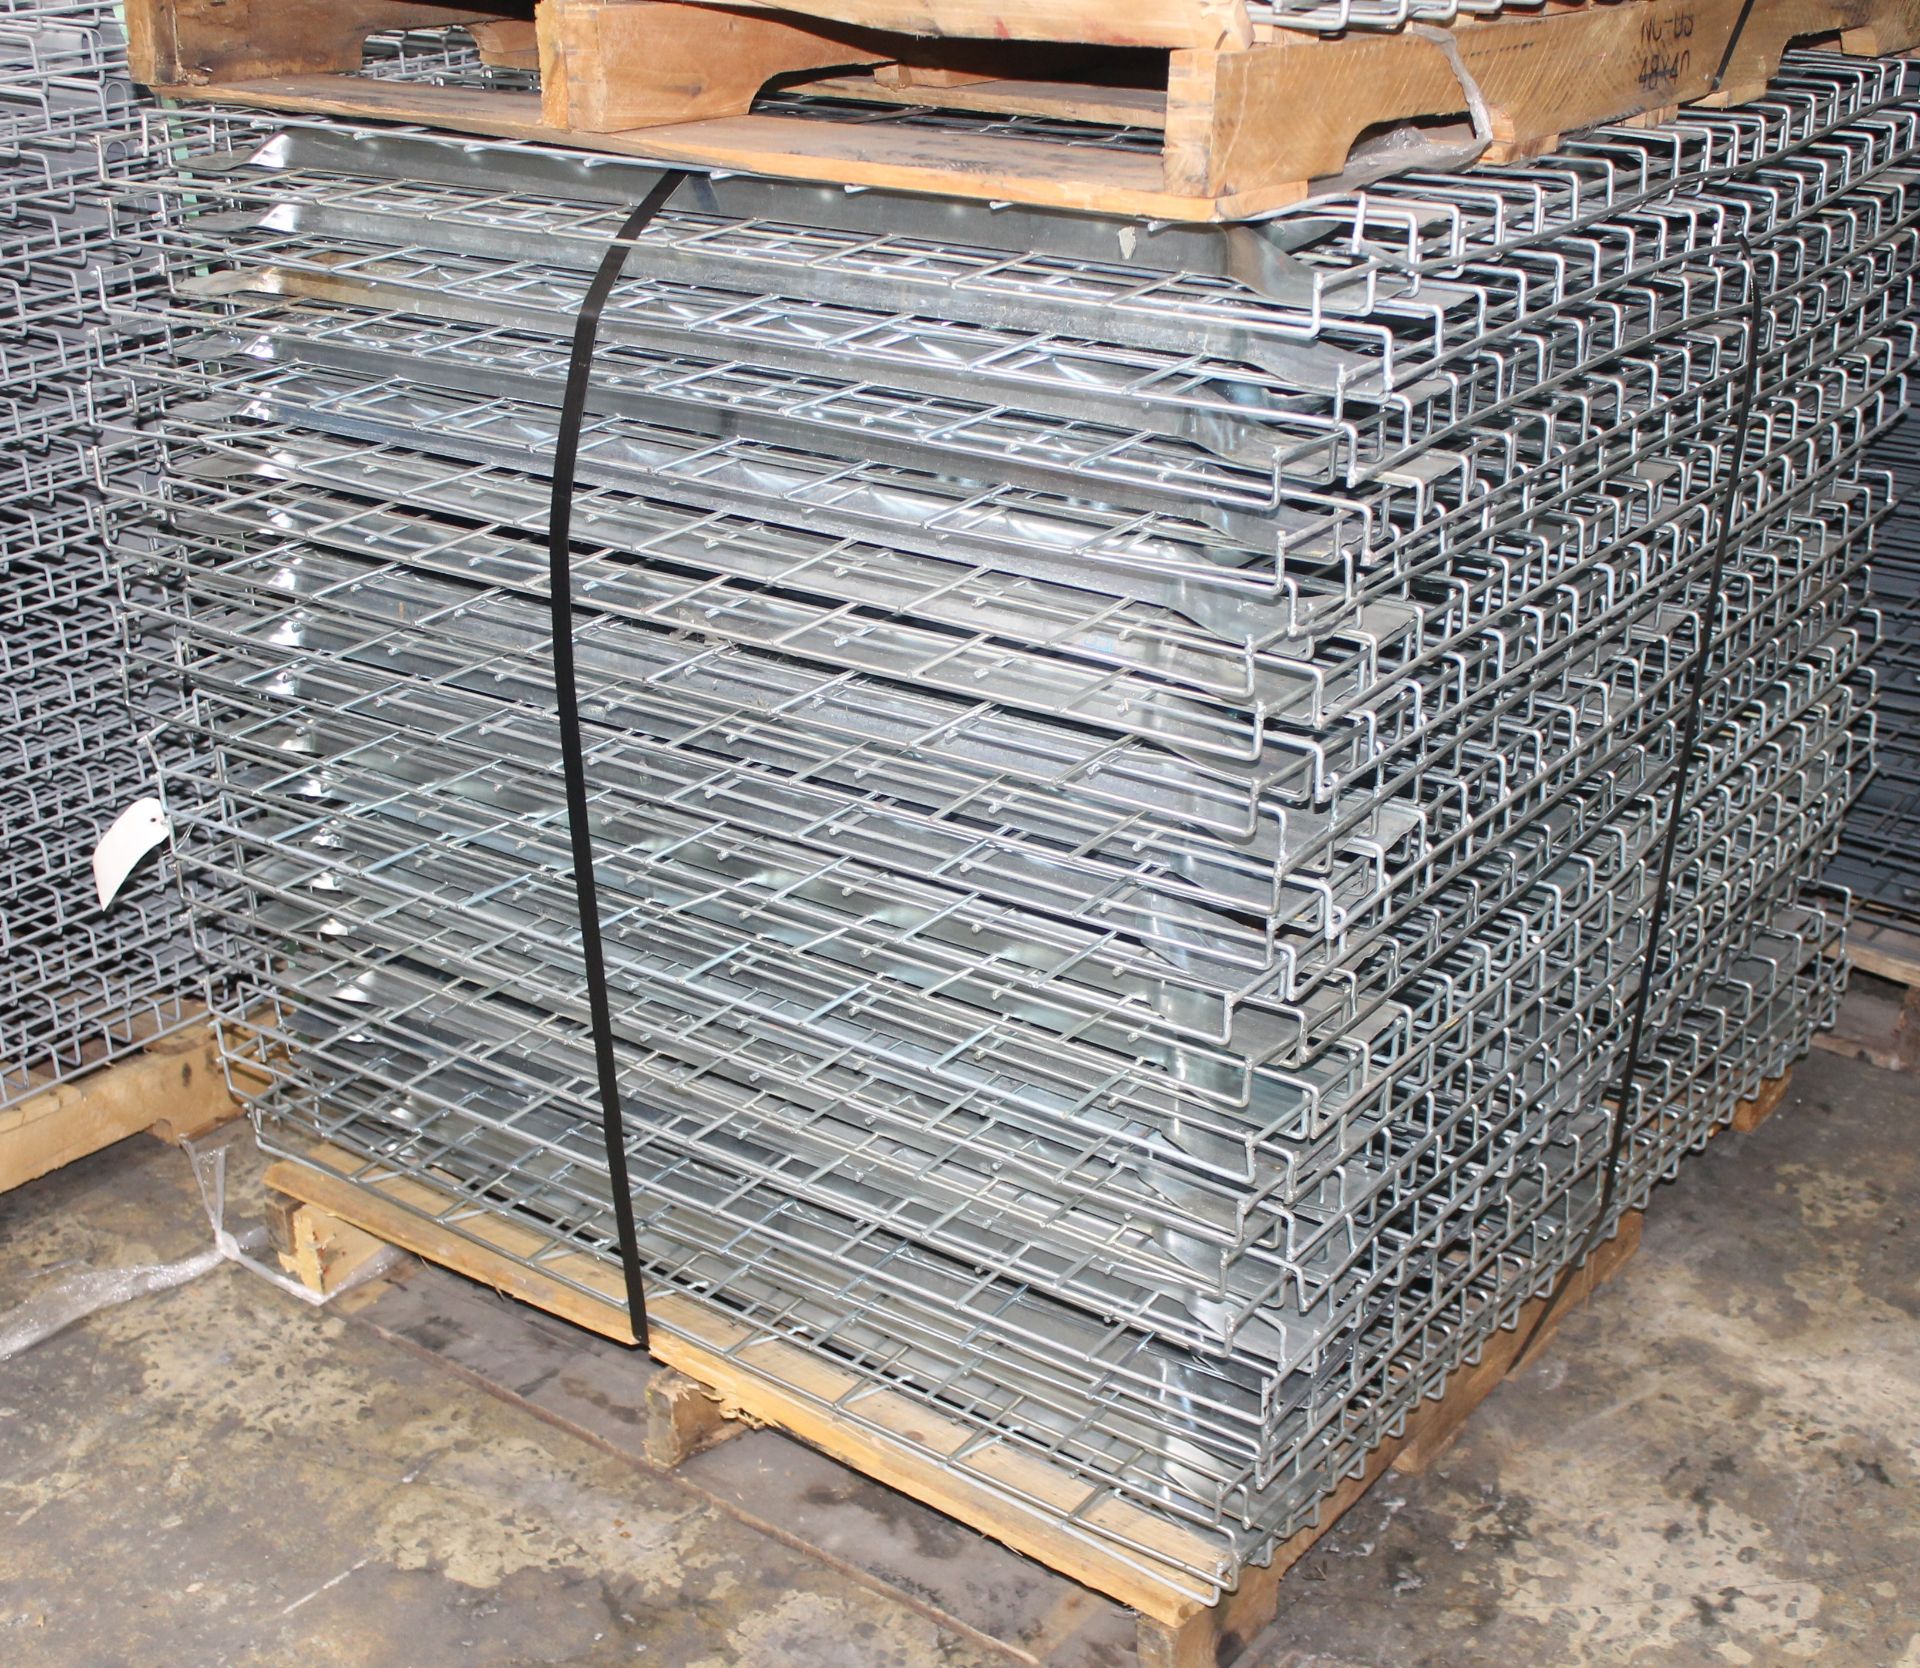 56 BAYS OF TEARDROP STYLE PALLET RACK, LIKE NEW, SIZE: 16'H x 42"D X 117"W, (3" X 3" POST) - Image 4 of 6